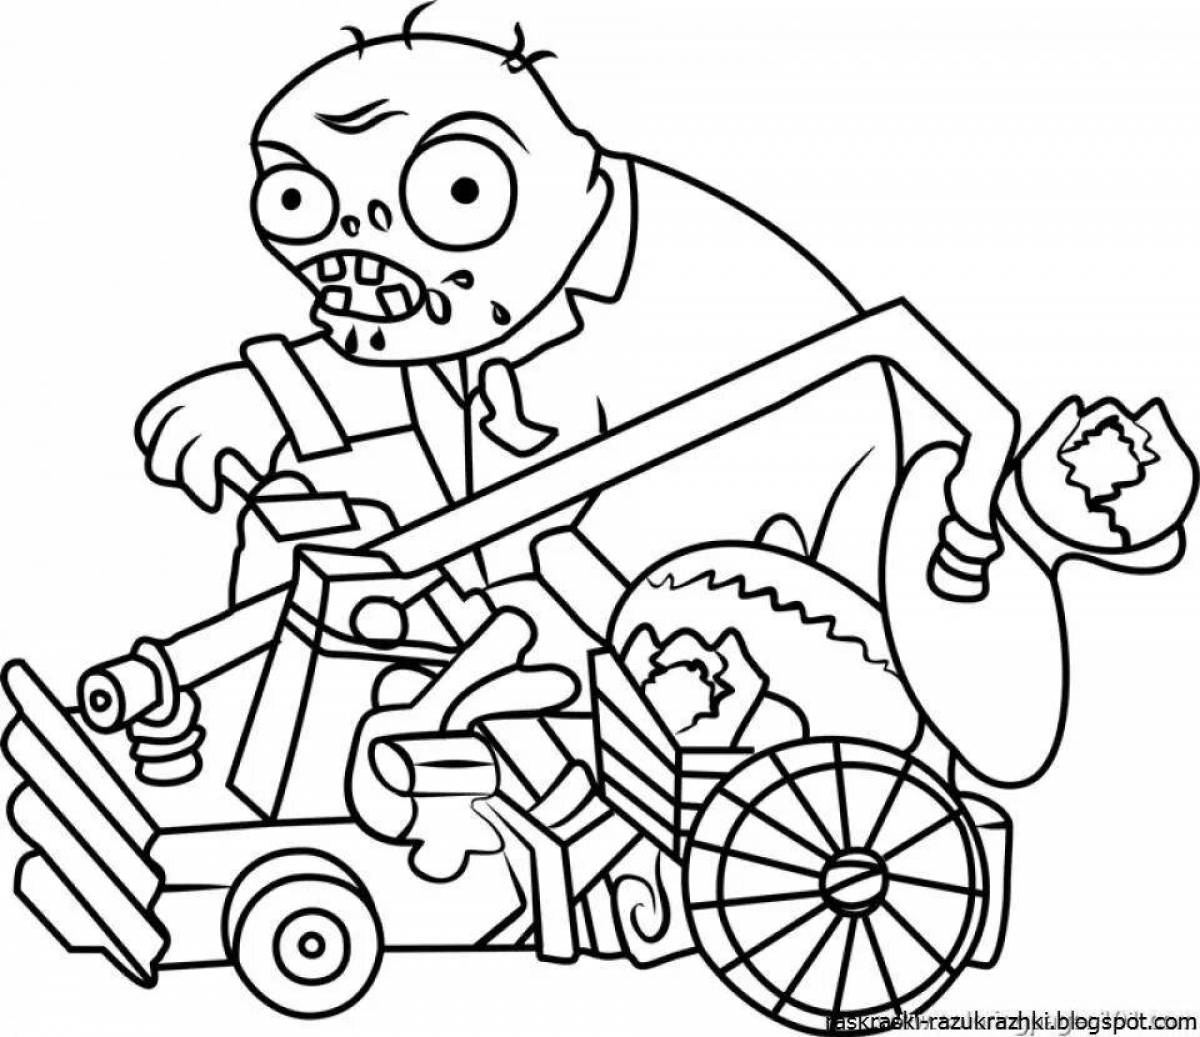 Coloring page scary zombie planet